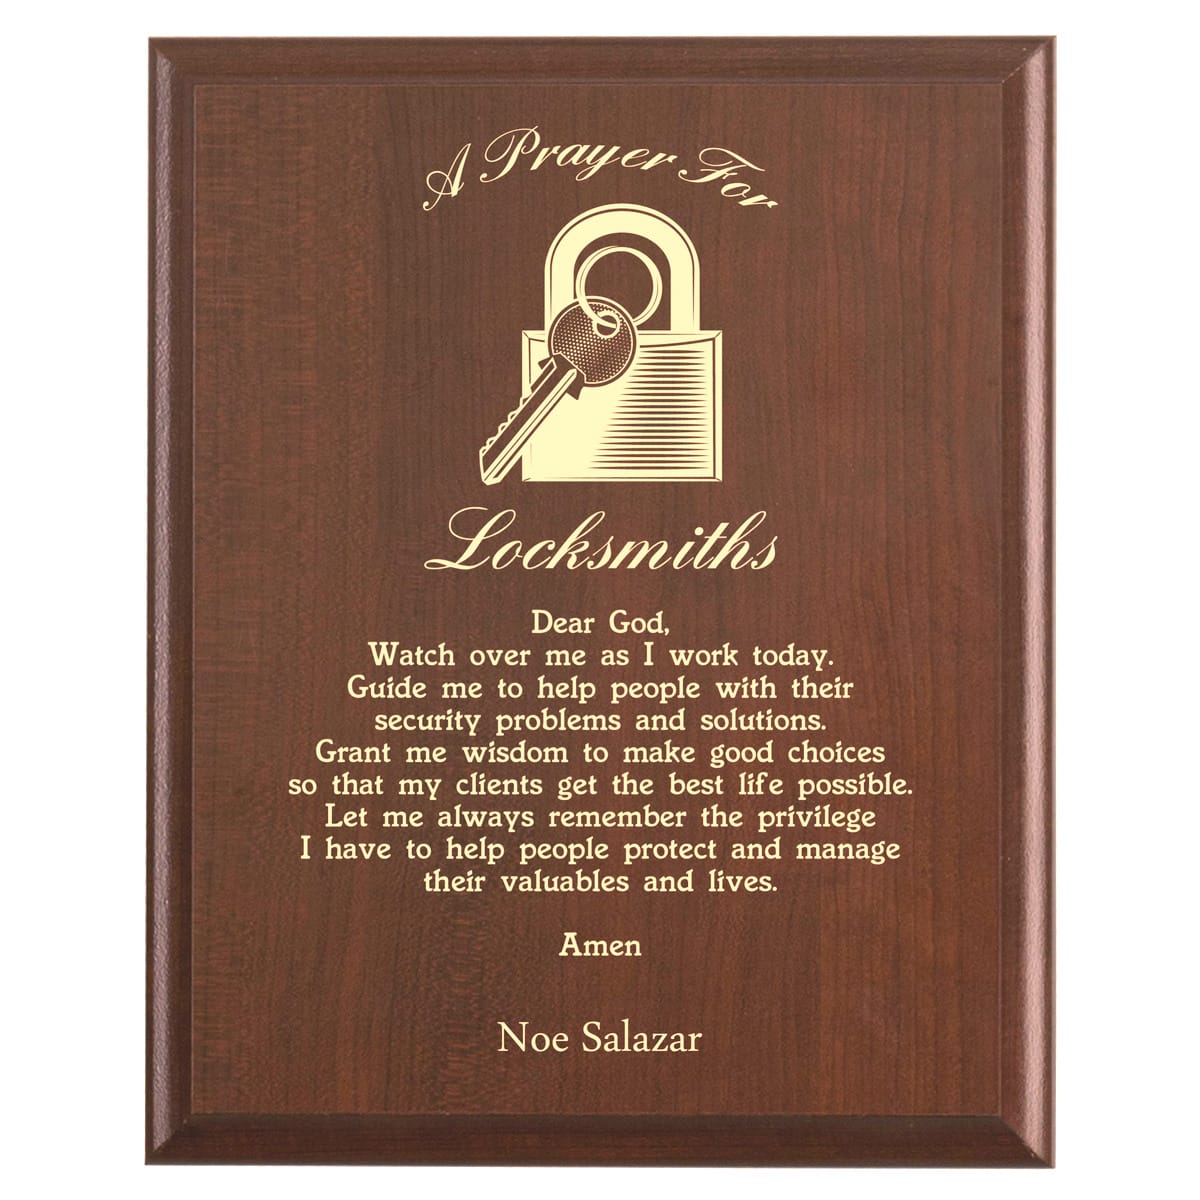 Plaque photo: Locksmith Prayer Plaque design with free personalization. Wood style finish with customized text.